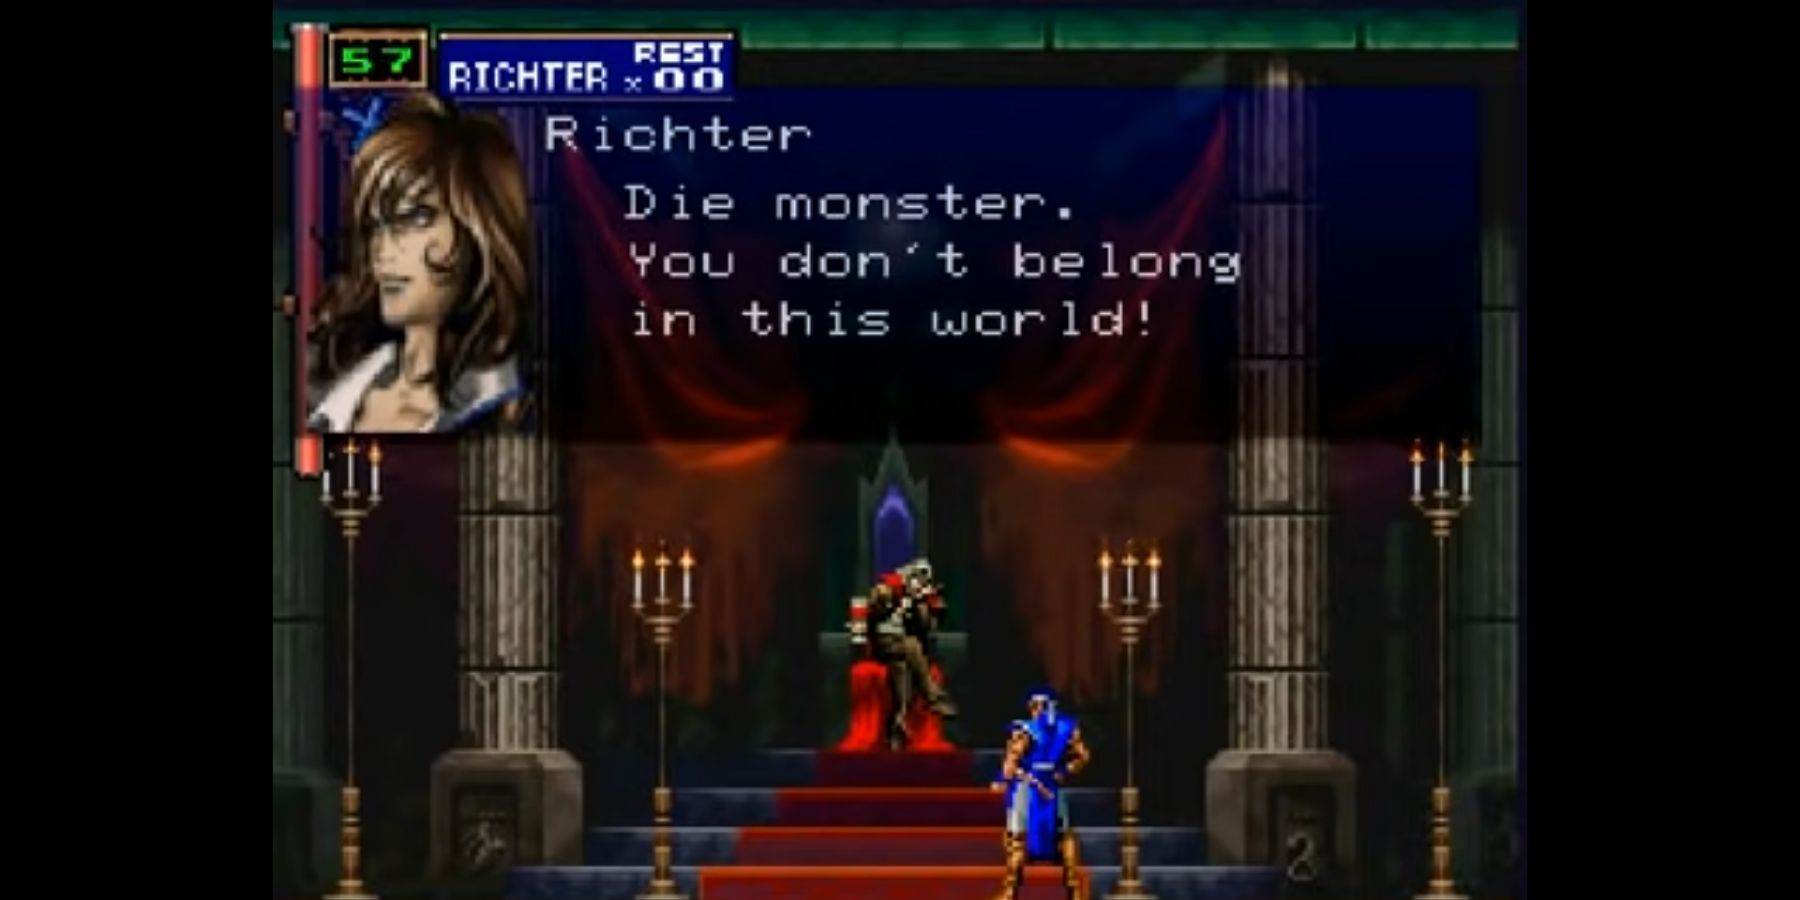 Richter confronting Dracula before they fight